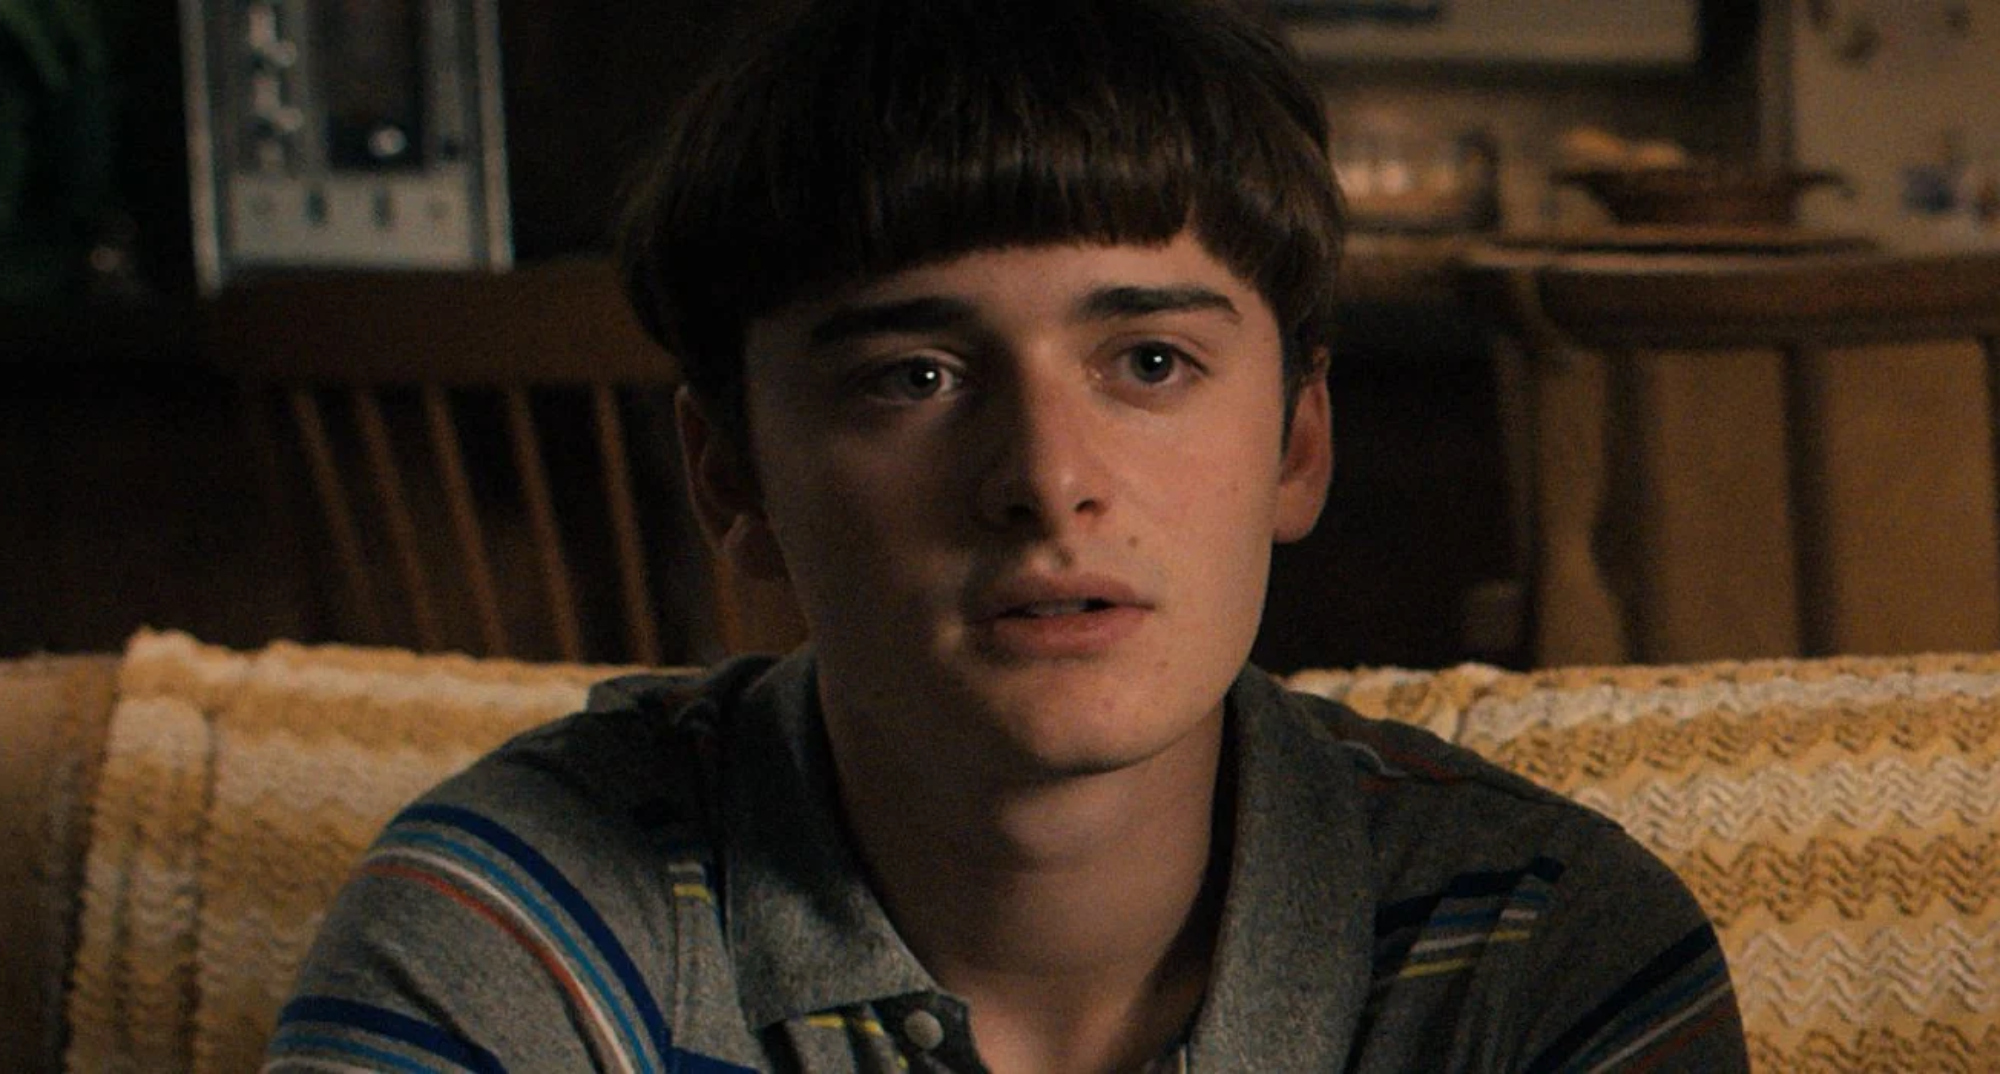 Will Byers in 'Stranger Things' Season 4 in relation to his sexuality sitting on couch.